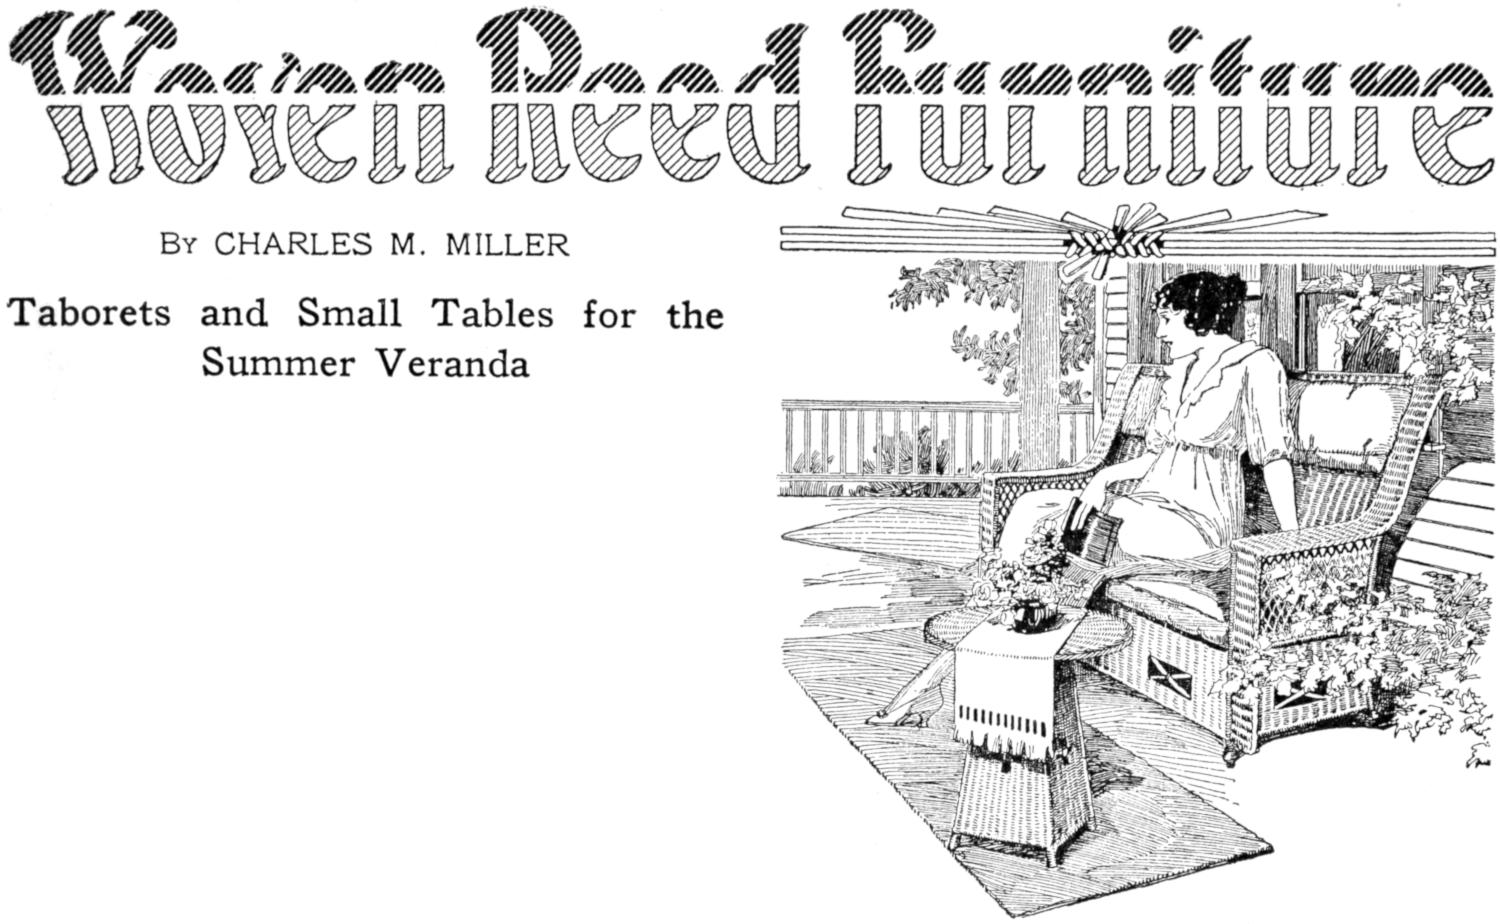 Chapter heading: lady on porch bench